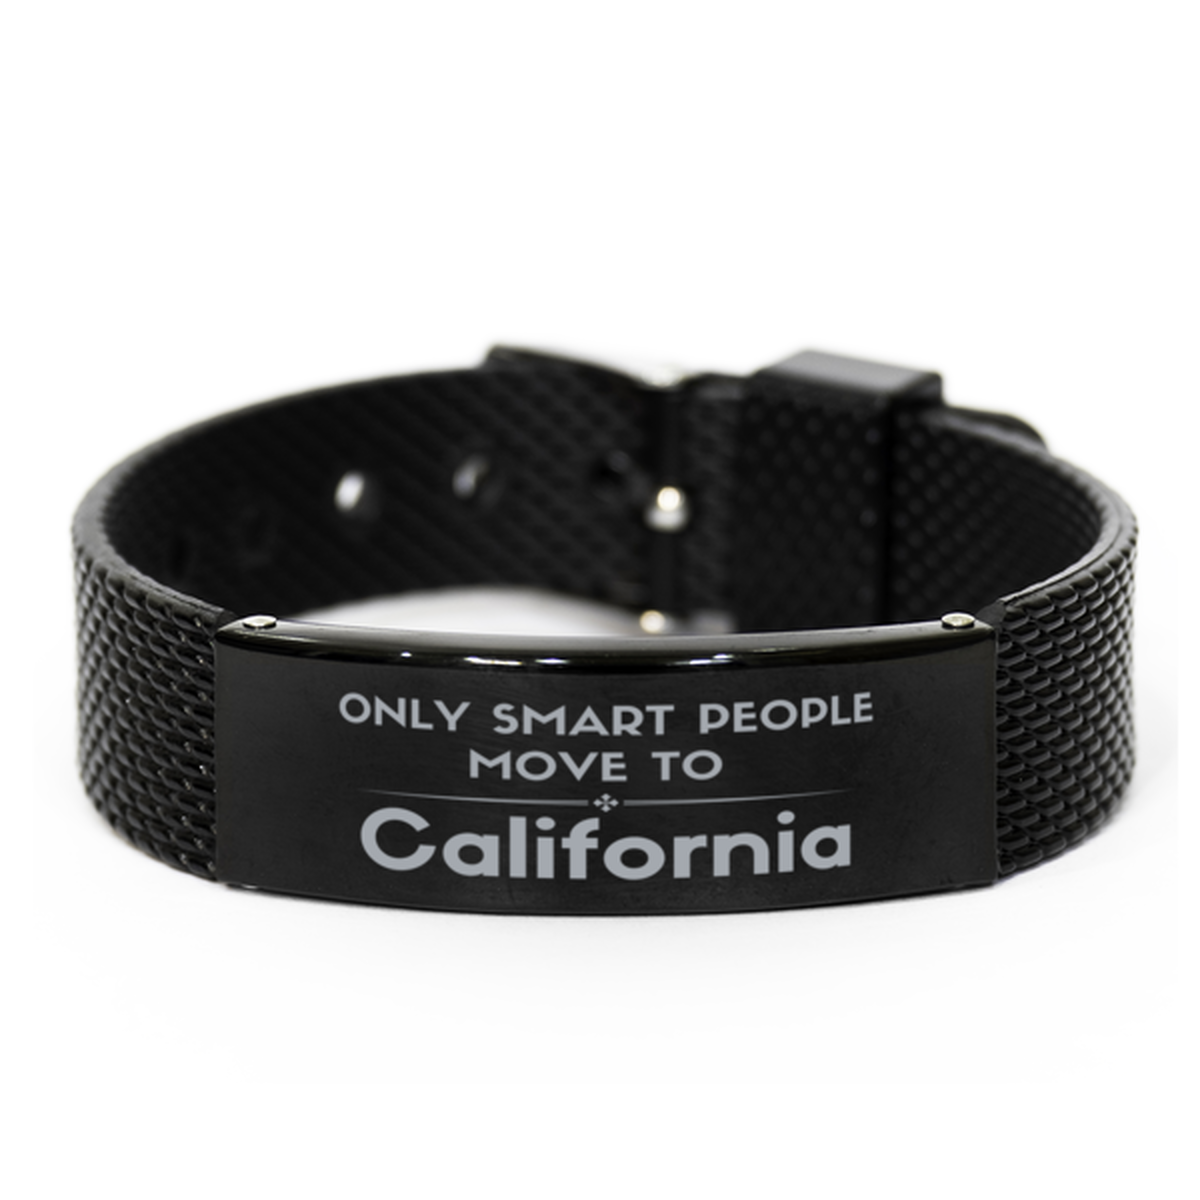 Only smart people move to California Black Shark Mesh Bracelet, Gag Gifts For California, Move to California Gifts for Friends Coworker Funny Saying Quote